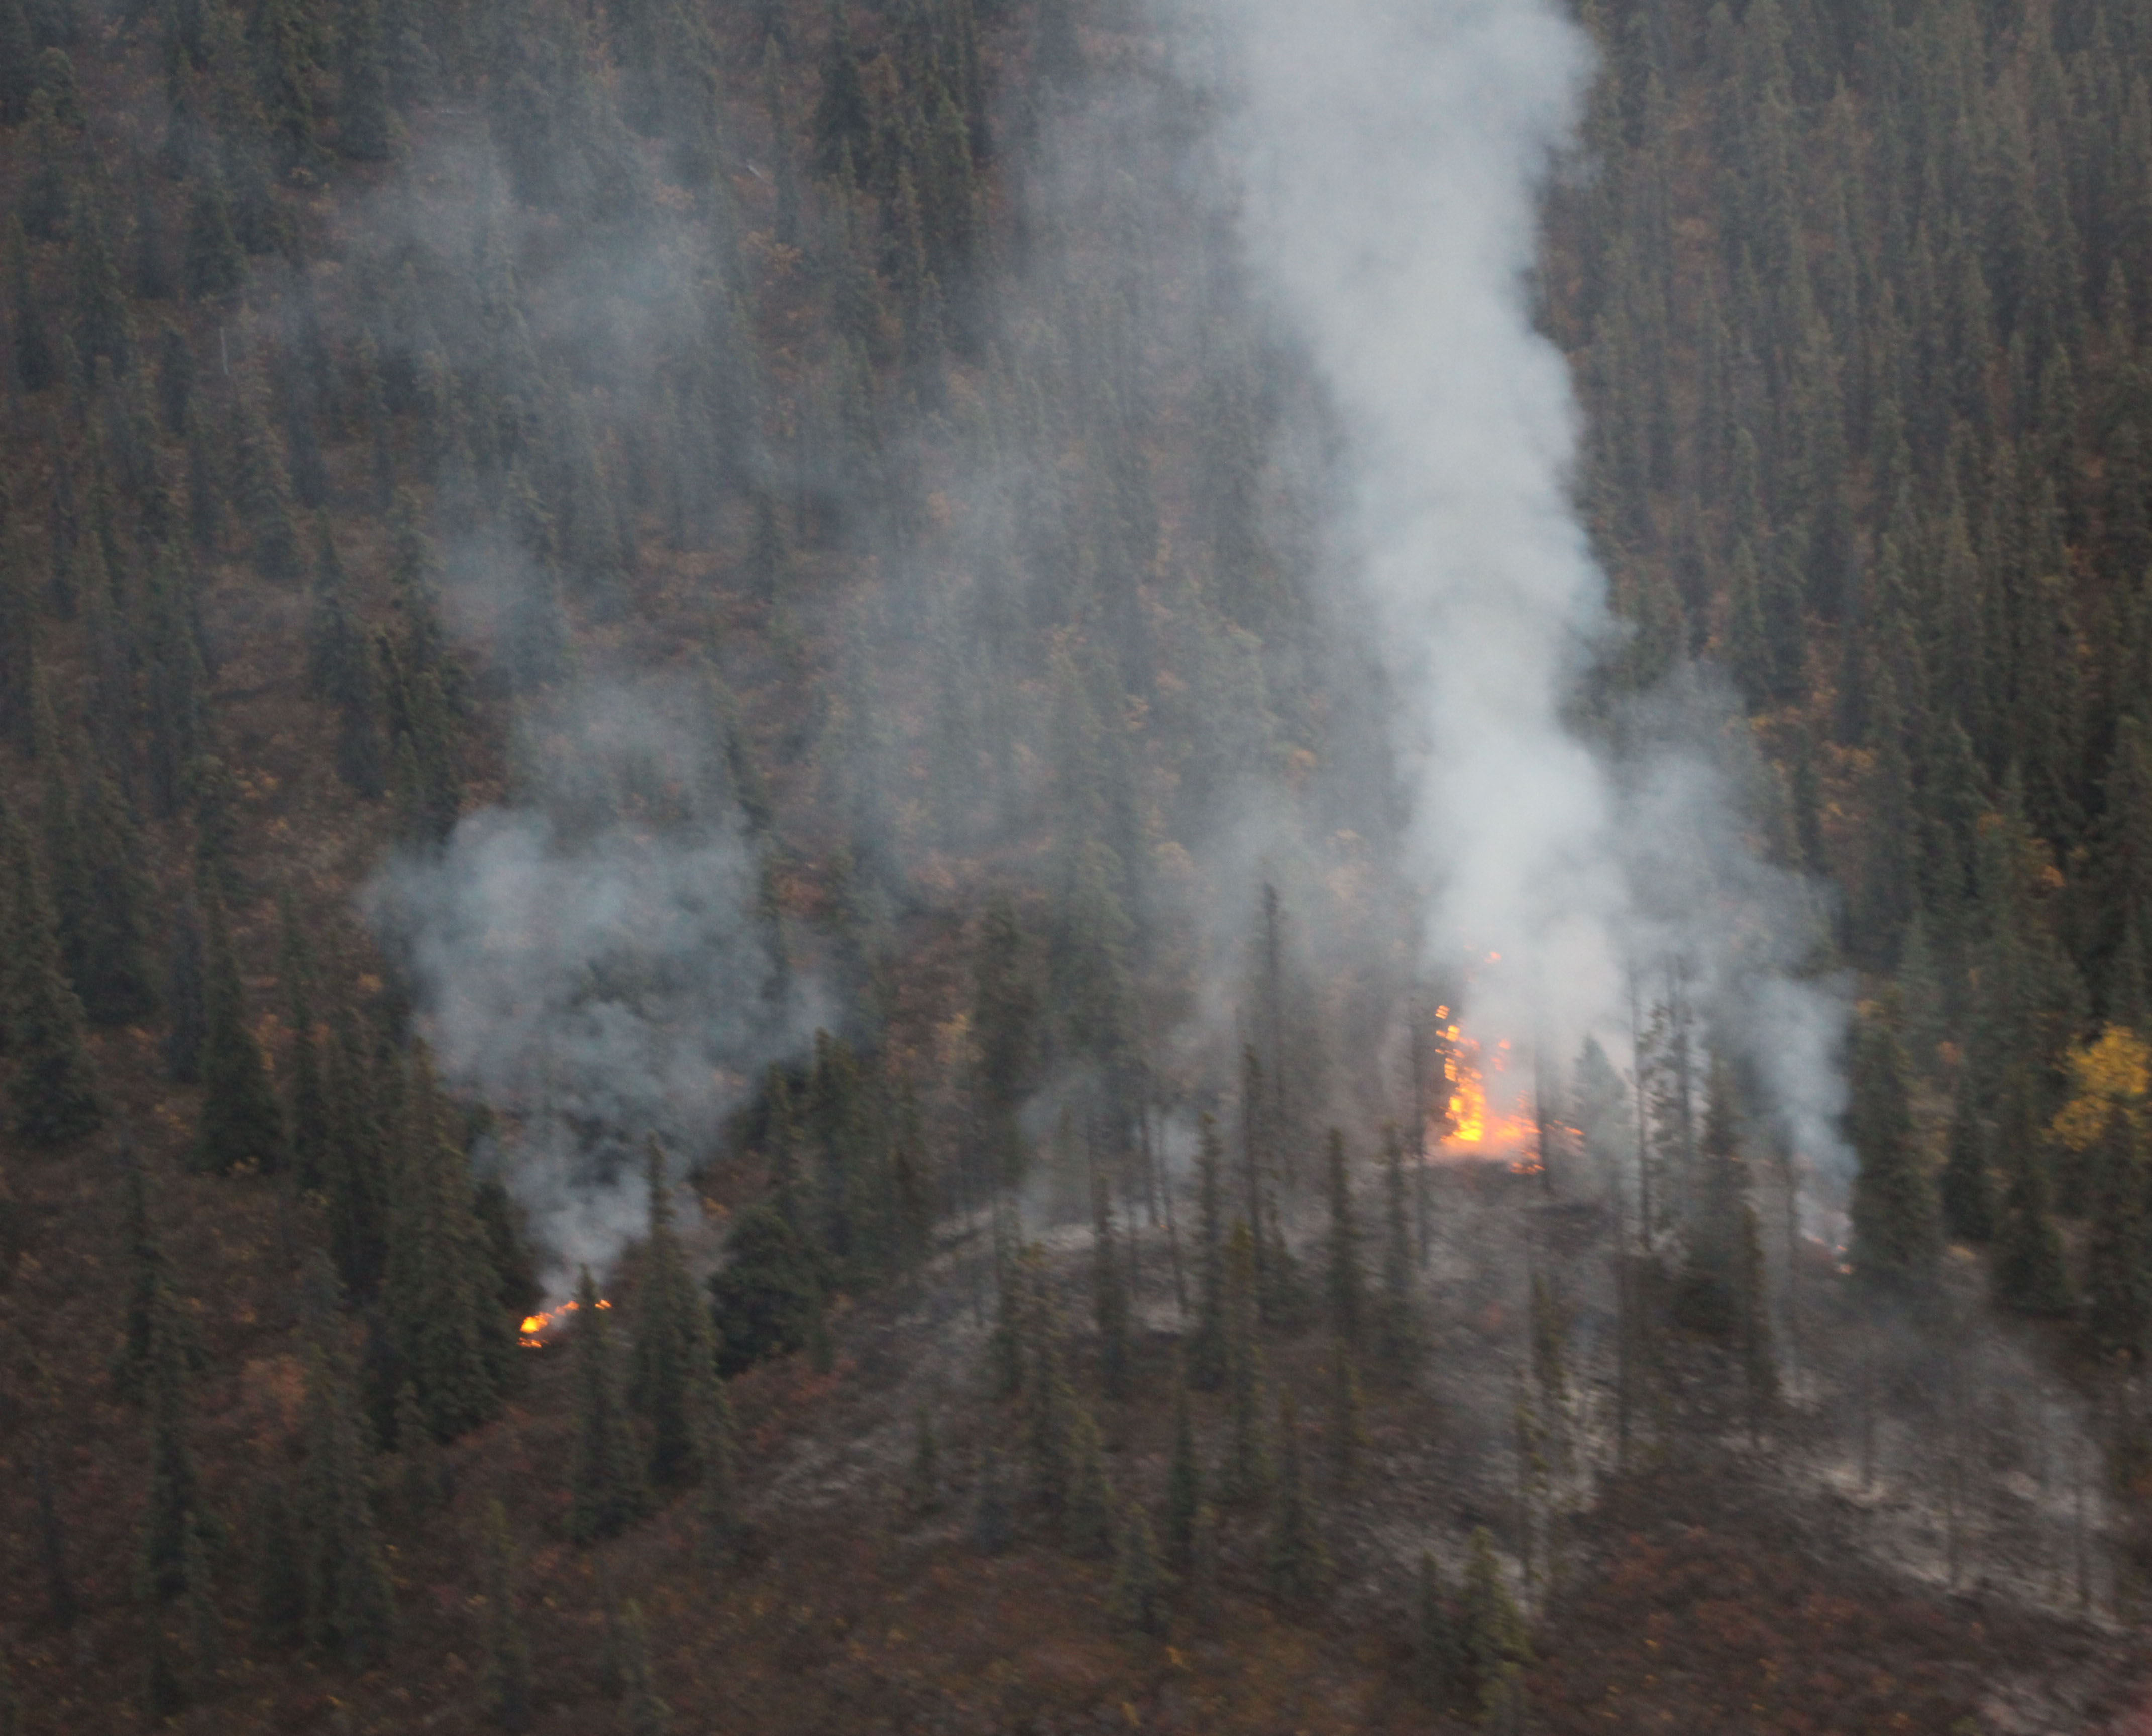 Red Hill Fire continues to burn Saturday evening. The fire, estimated at 1 acre, is approximately 100 miles northeast of Glennallen and 1.8 miles northeast of Chisana. (Photo courtesy Luke Wassick/National Park Service)